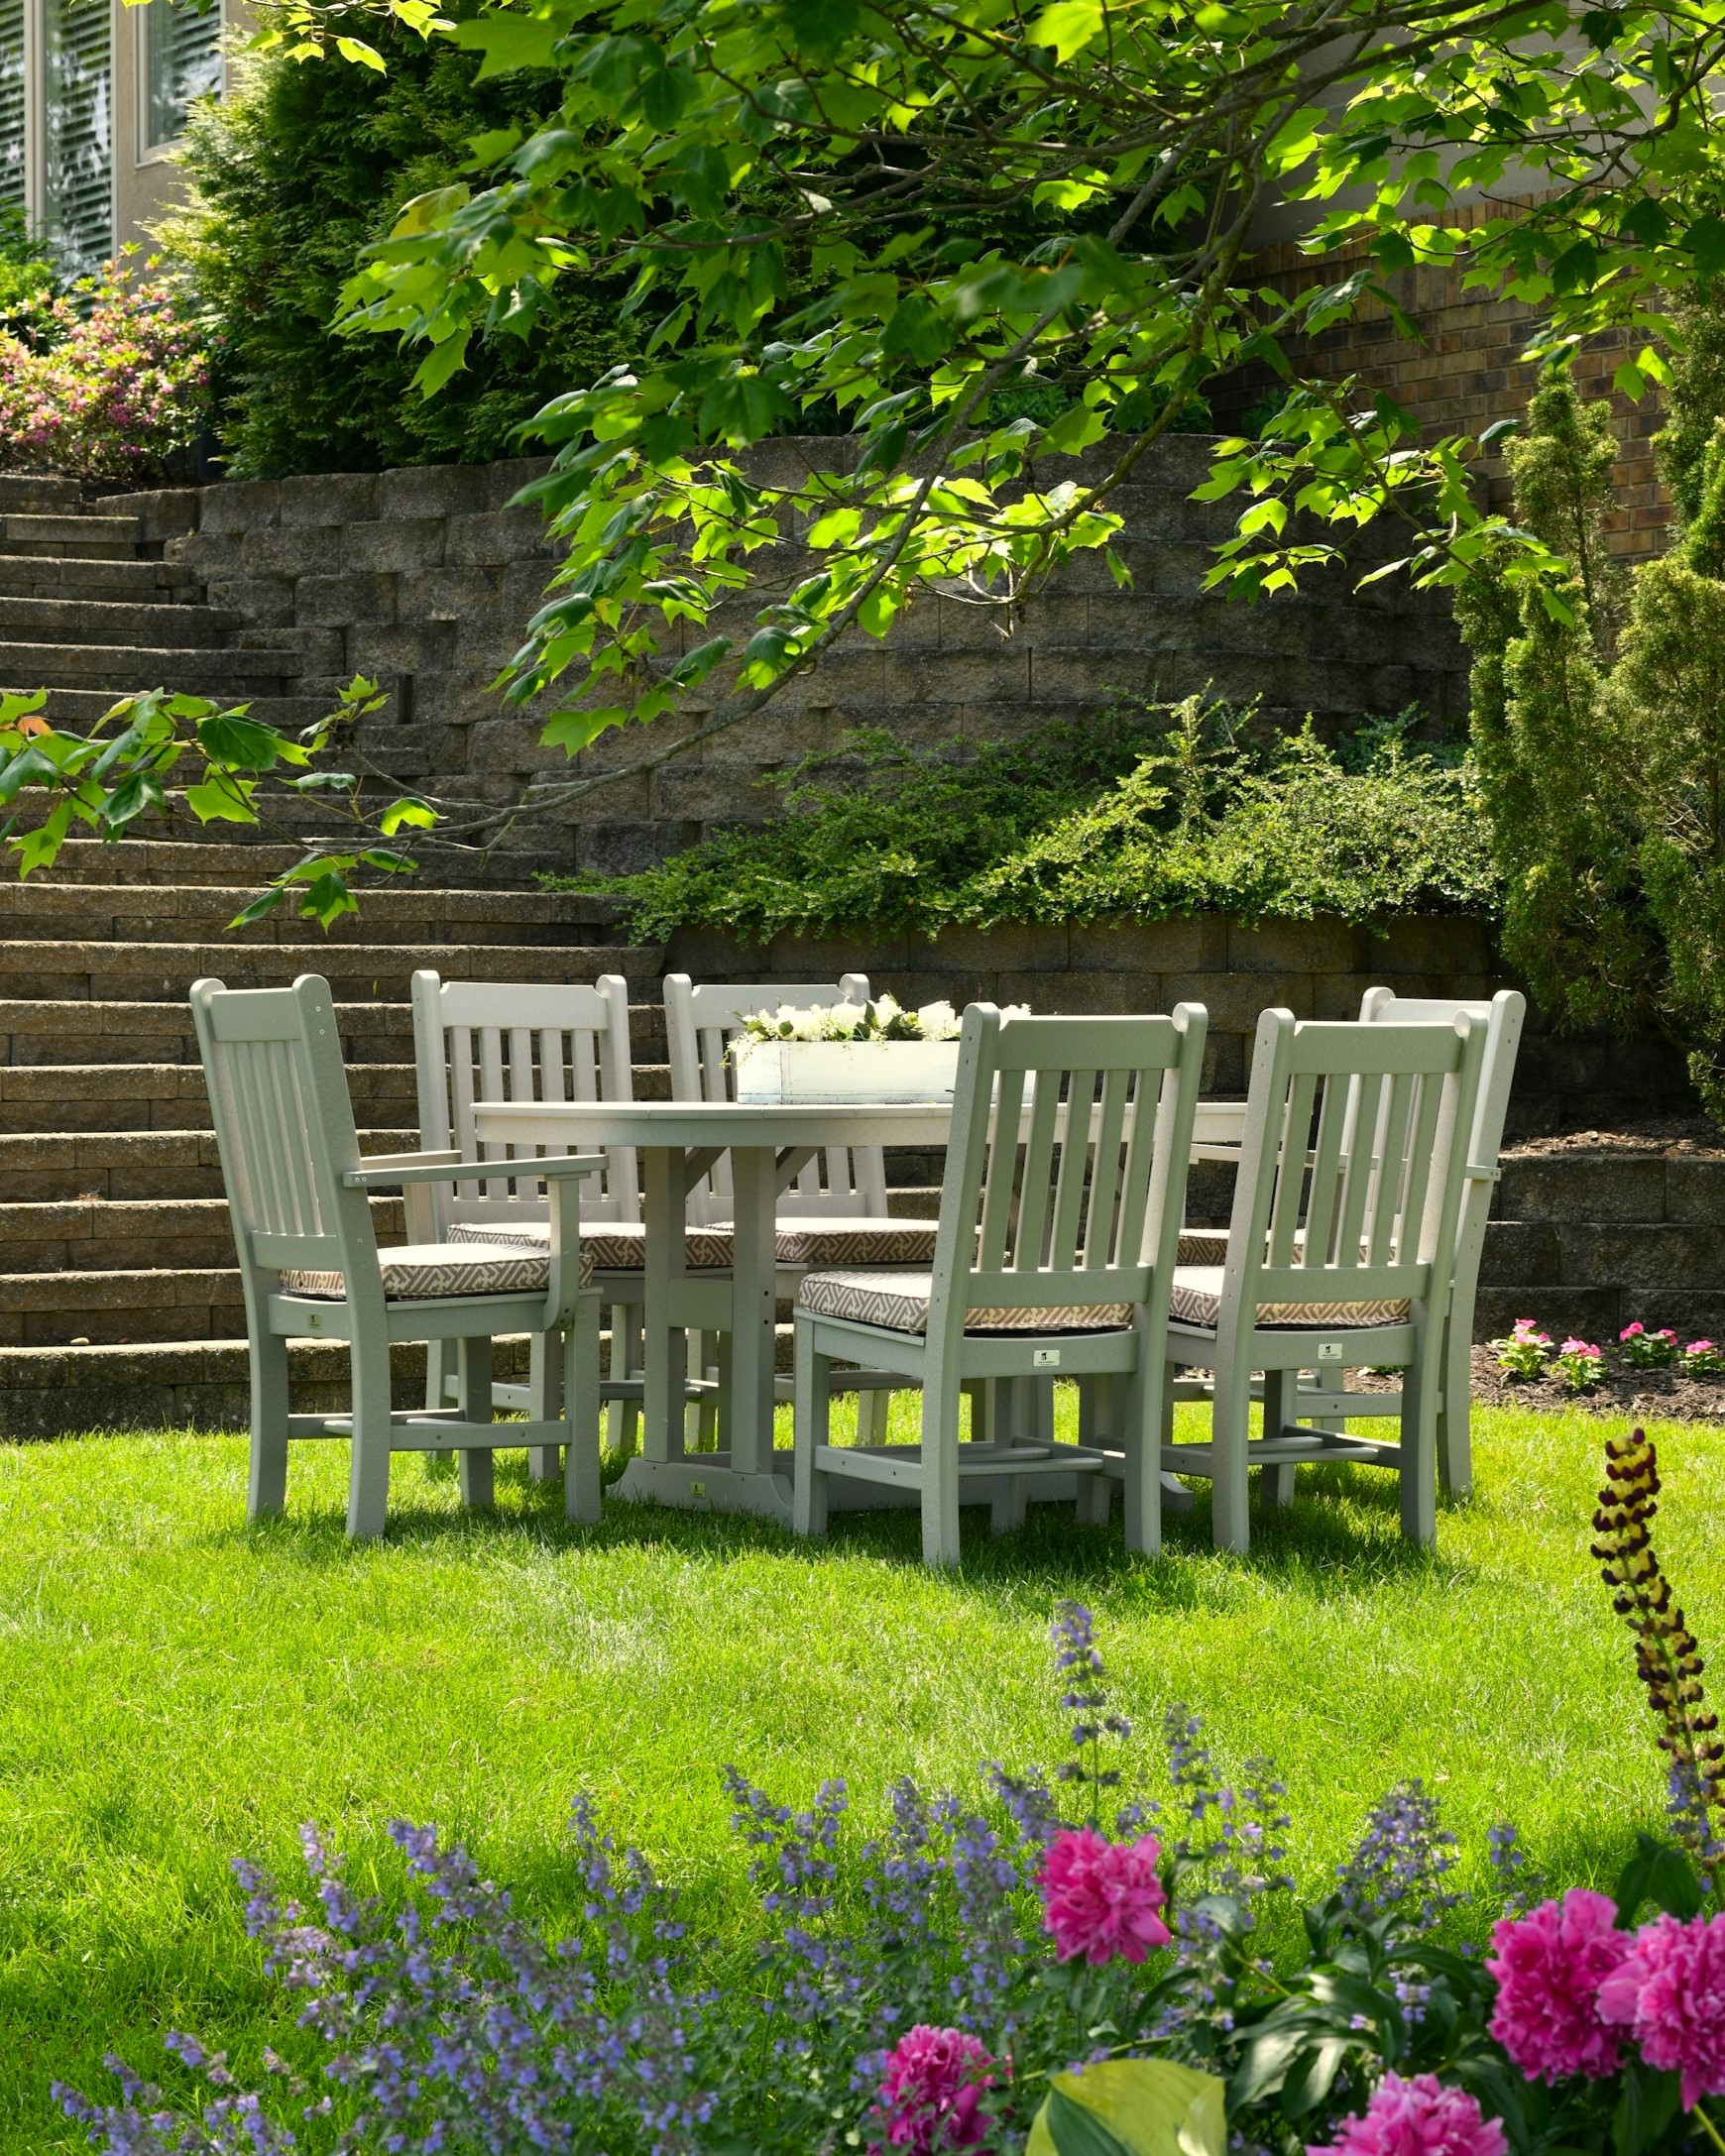 Green lawn with flowers in the foreground, white square table with 6 chairs in the middle and stairs in the backround